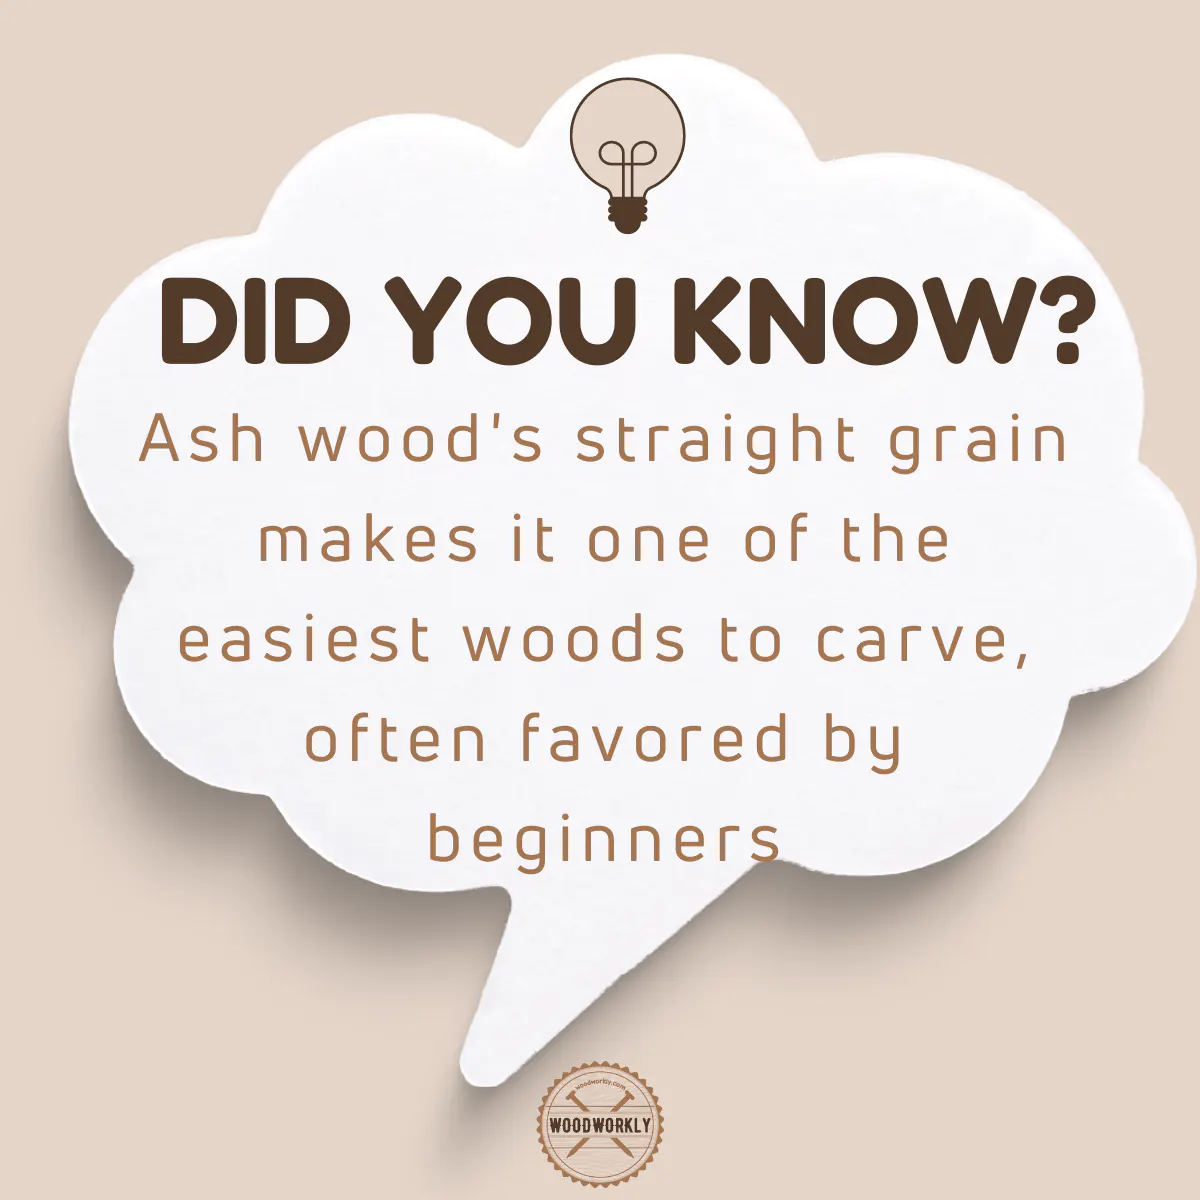 Did you know fact about carving Ash wood